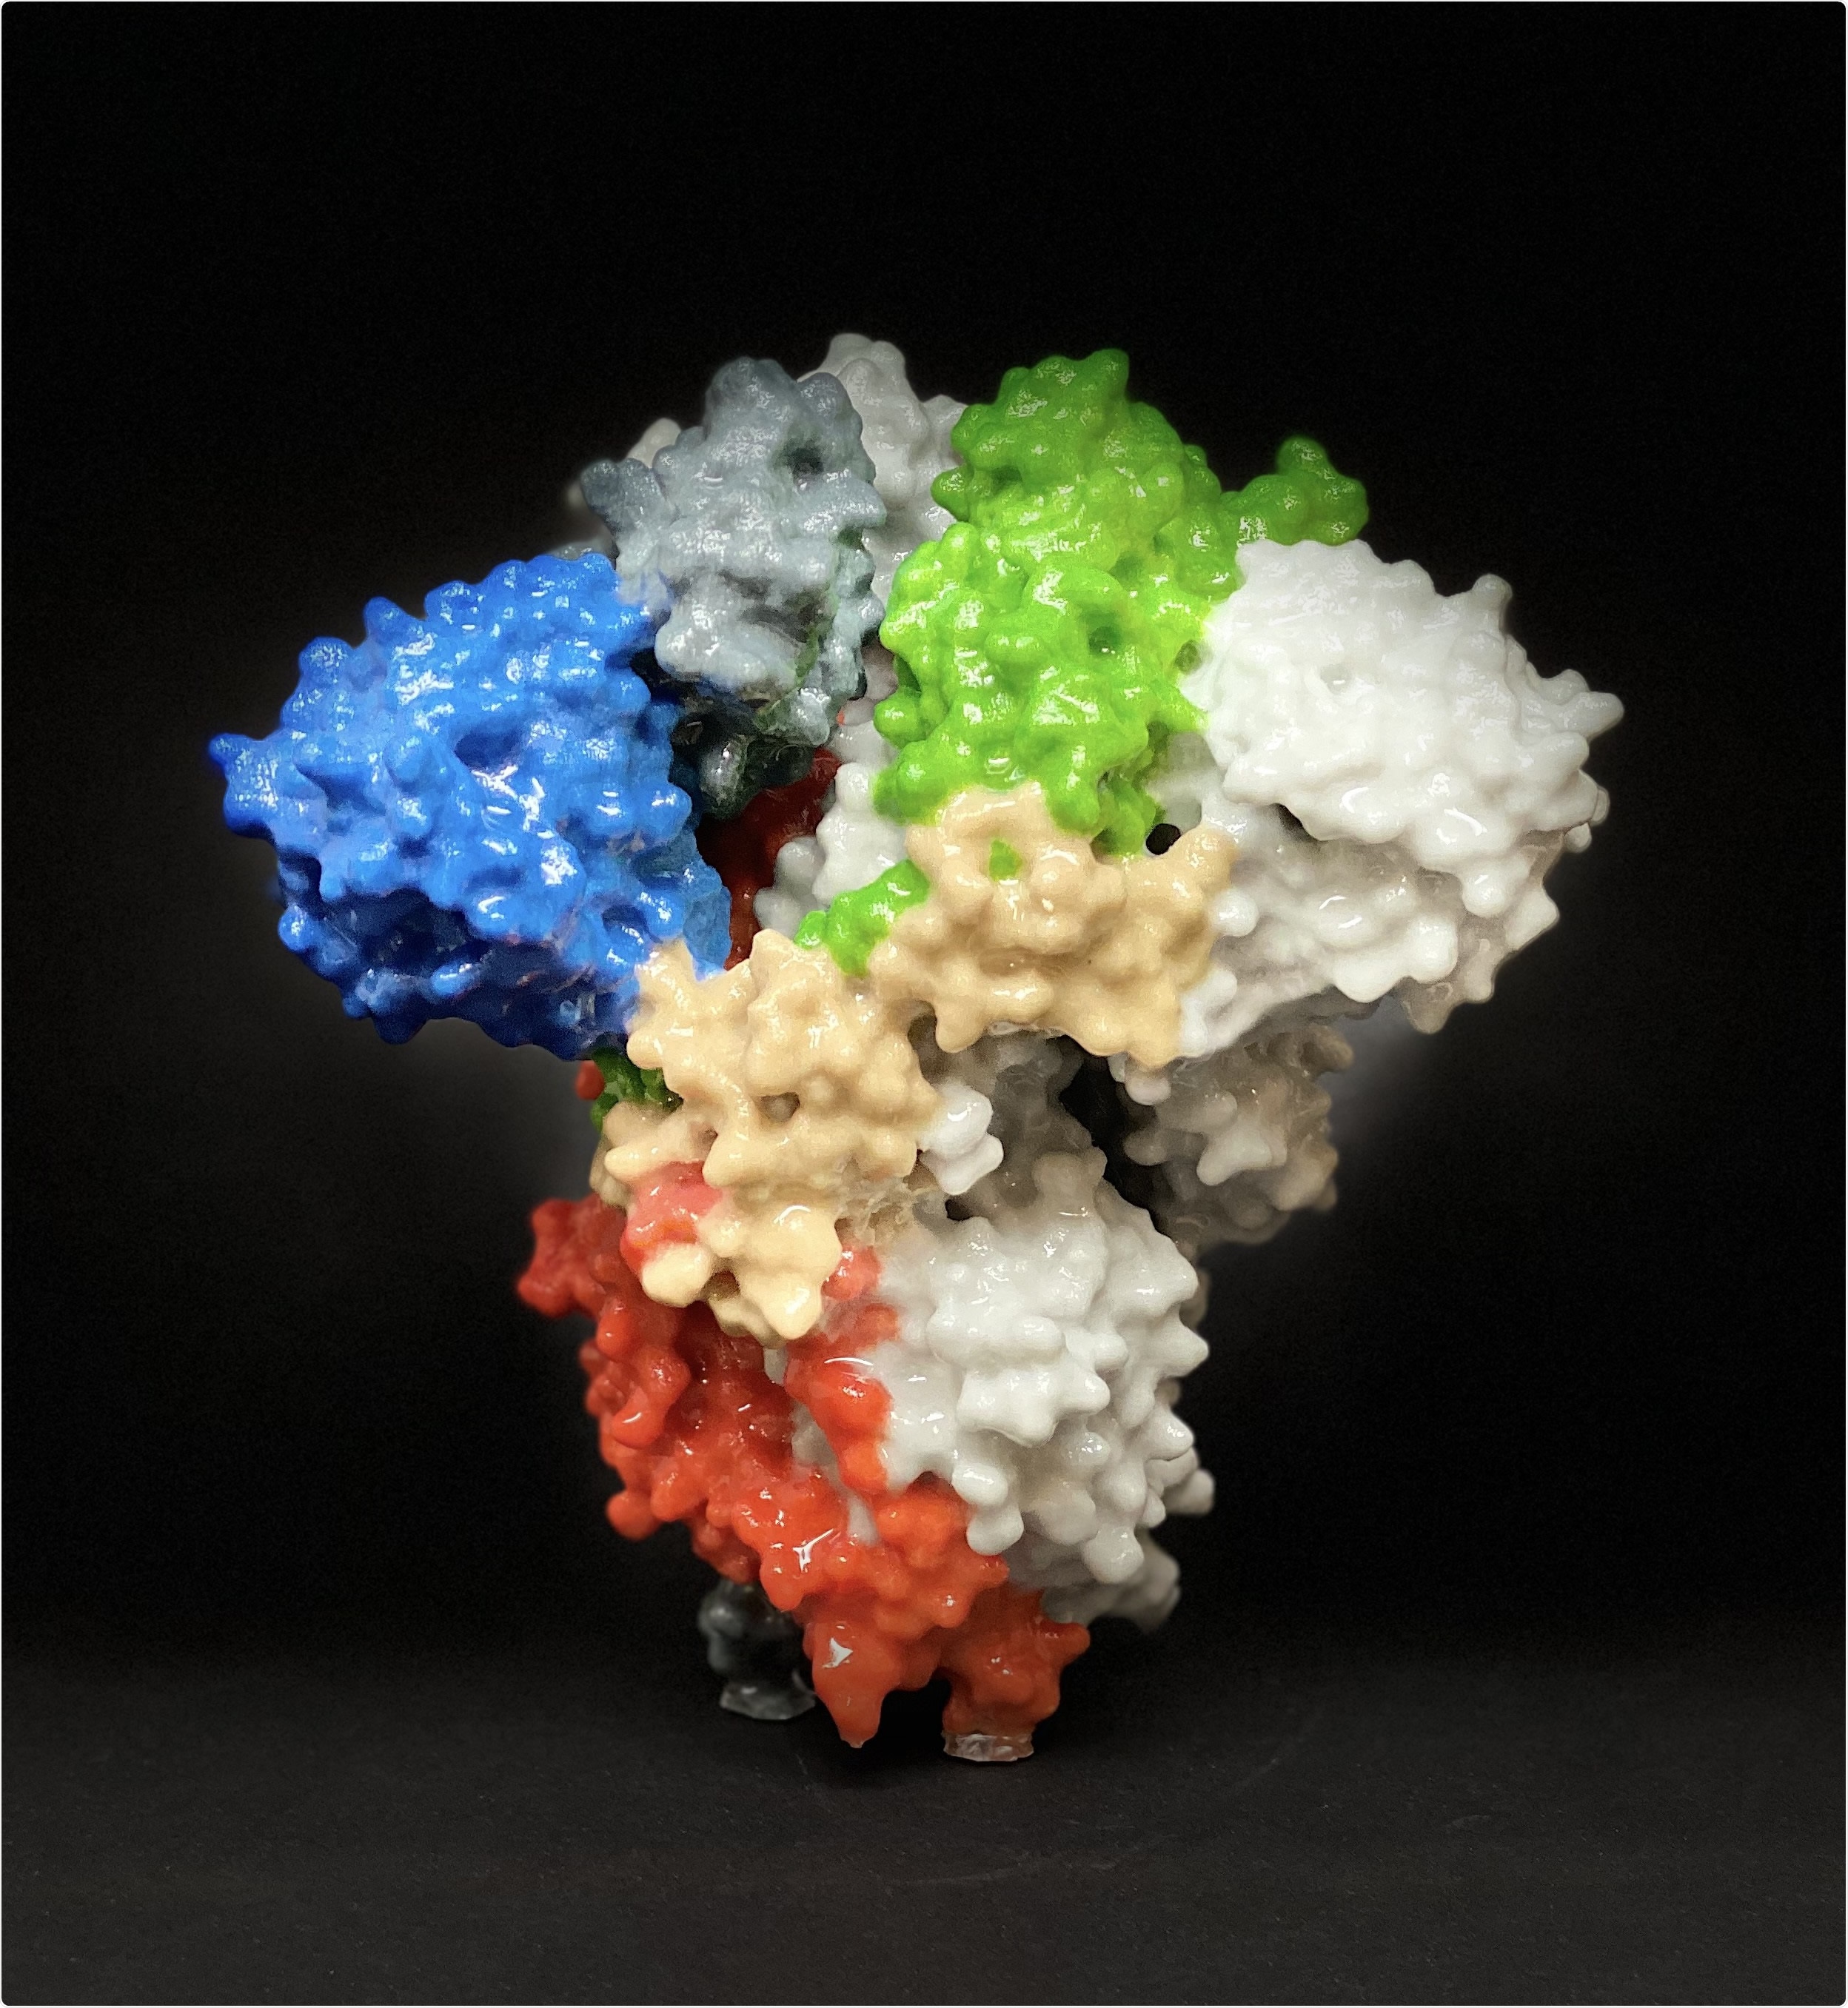 Novel Coronavirus SARS-CoV-2 Spike Protein 3D print of a spike protein on the surface of SARS-CoV-2—also known as 2019-nCoV, the virus that causes COVID-19. Spike proteins cover the surface of SARS-CoV-2 and enable the virus to enter and infect human cells. For more information, visit the NIH 3D Print Exchange at 3dprint.nih.gov. Credit: NIH